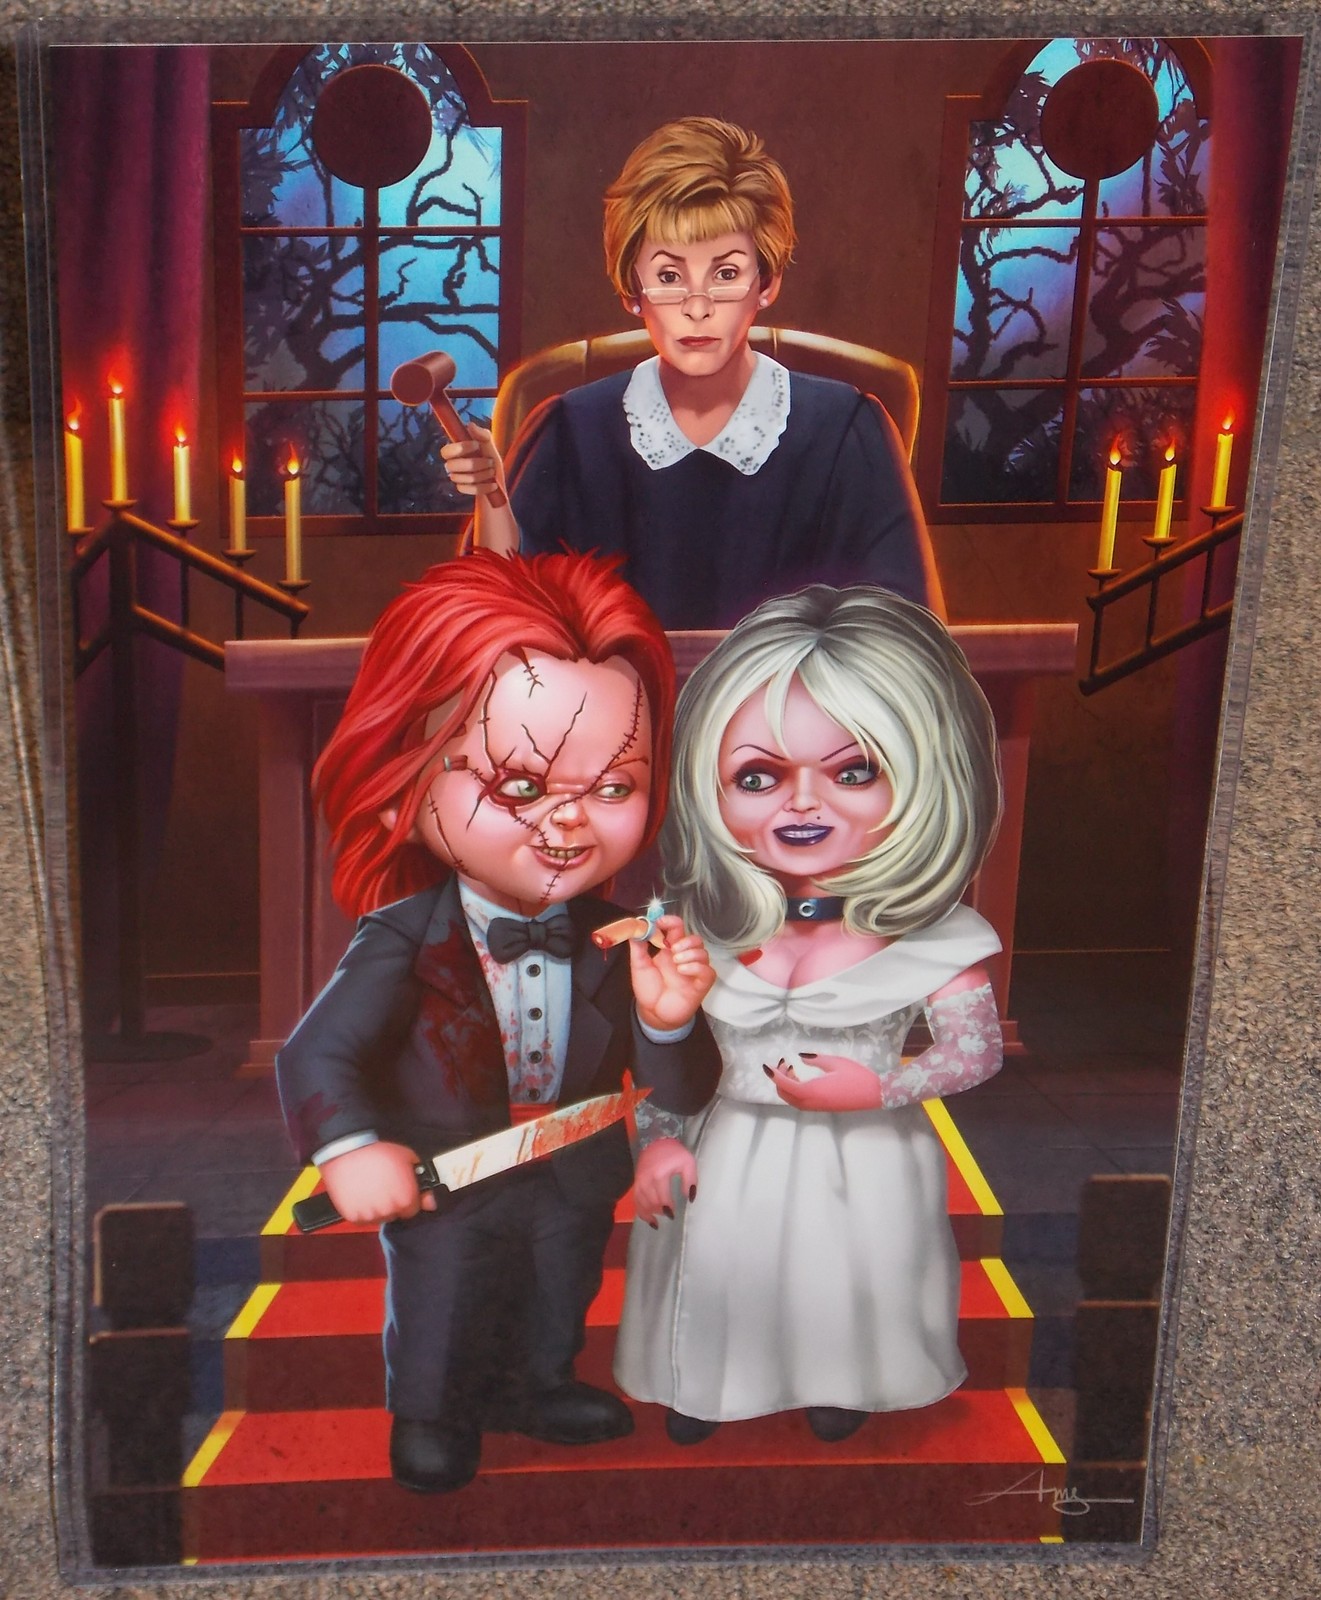 Show full-size image of Chucky & The Bride With Judge Judy Glossy Art P...